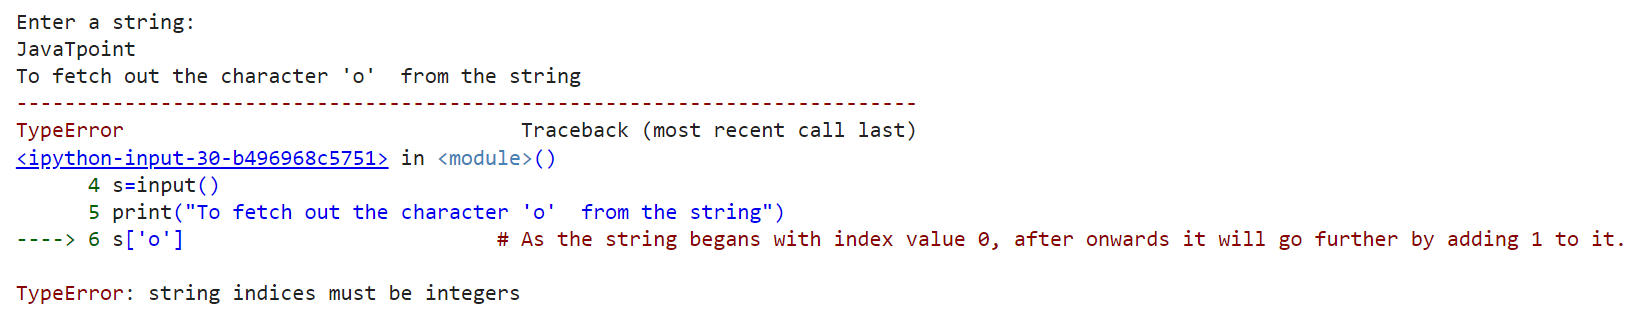 TypeError string indices must be an integer